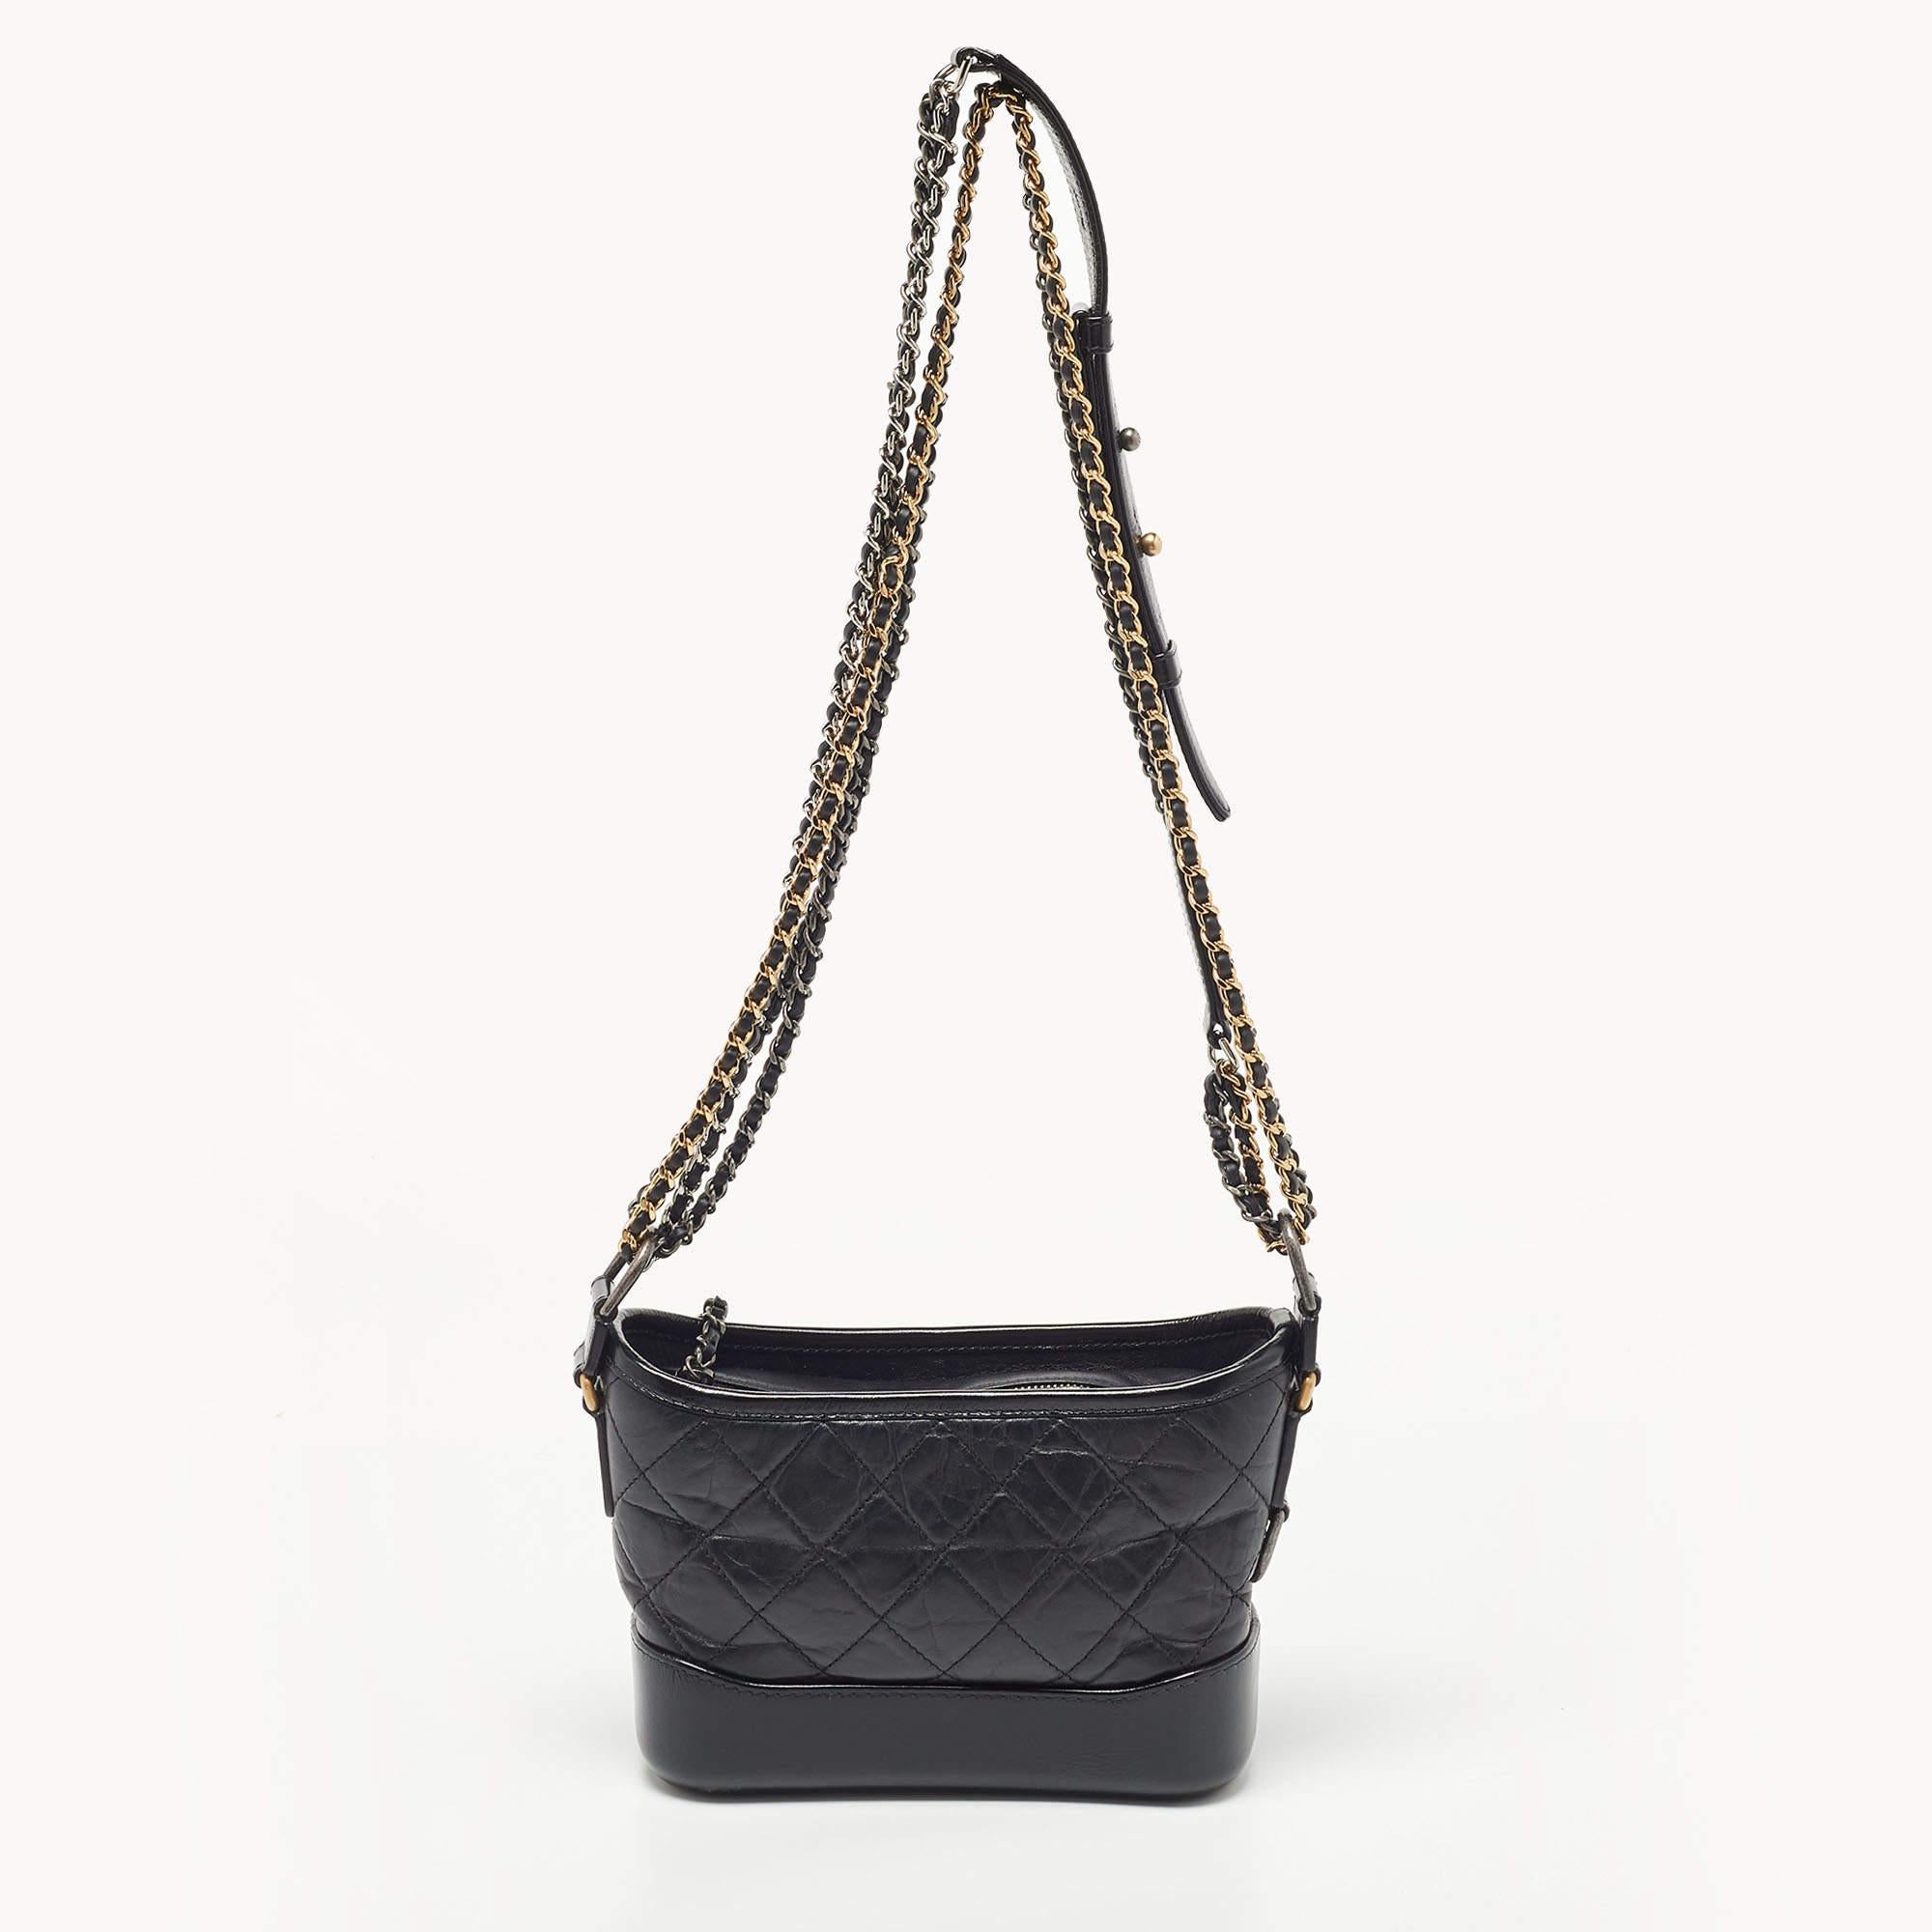 Chanel Black Quilted Aged Leather Small Gabrielle Hobo 8